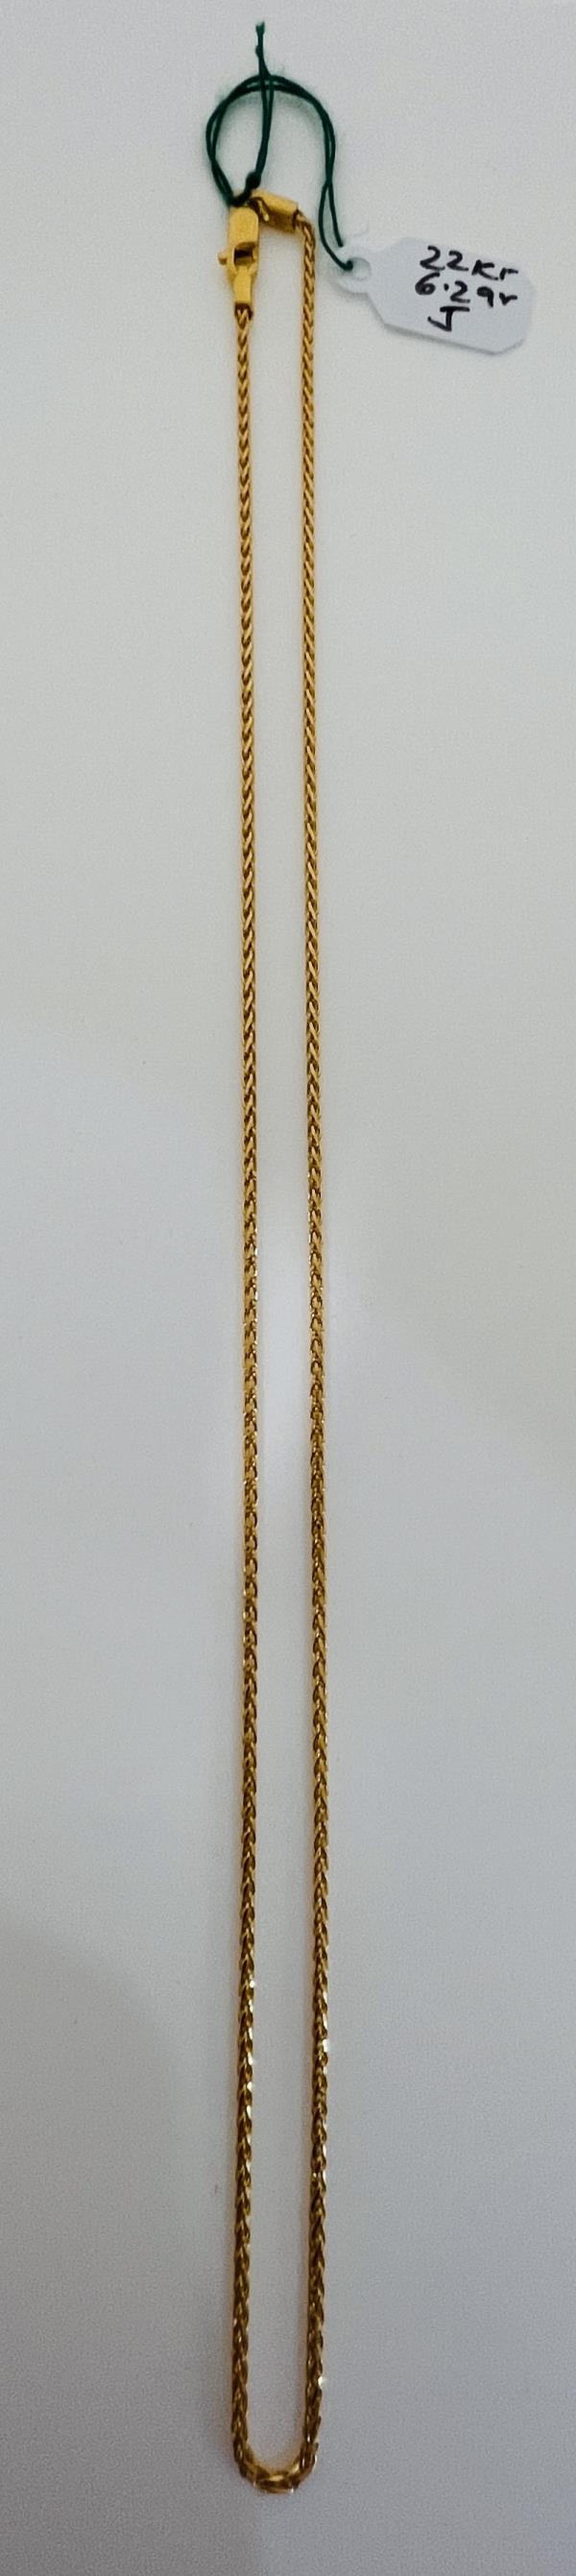 22KT GOLD CHAIN 17" 6.2GM